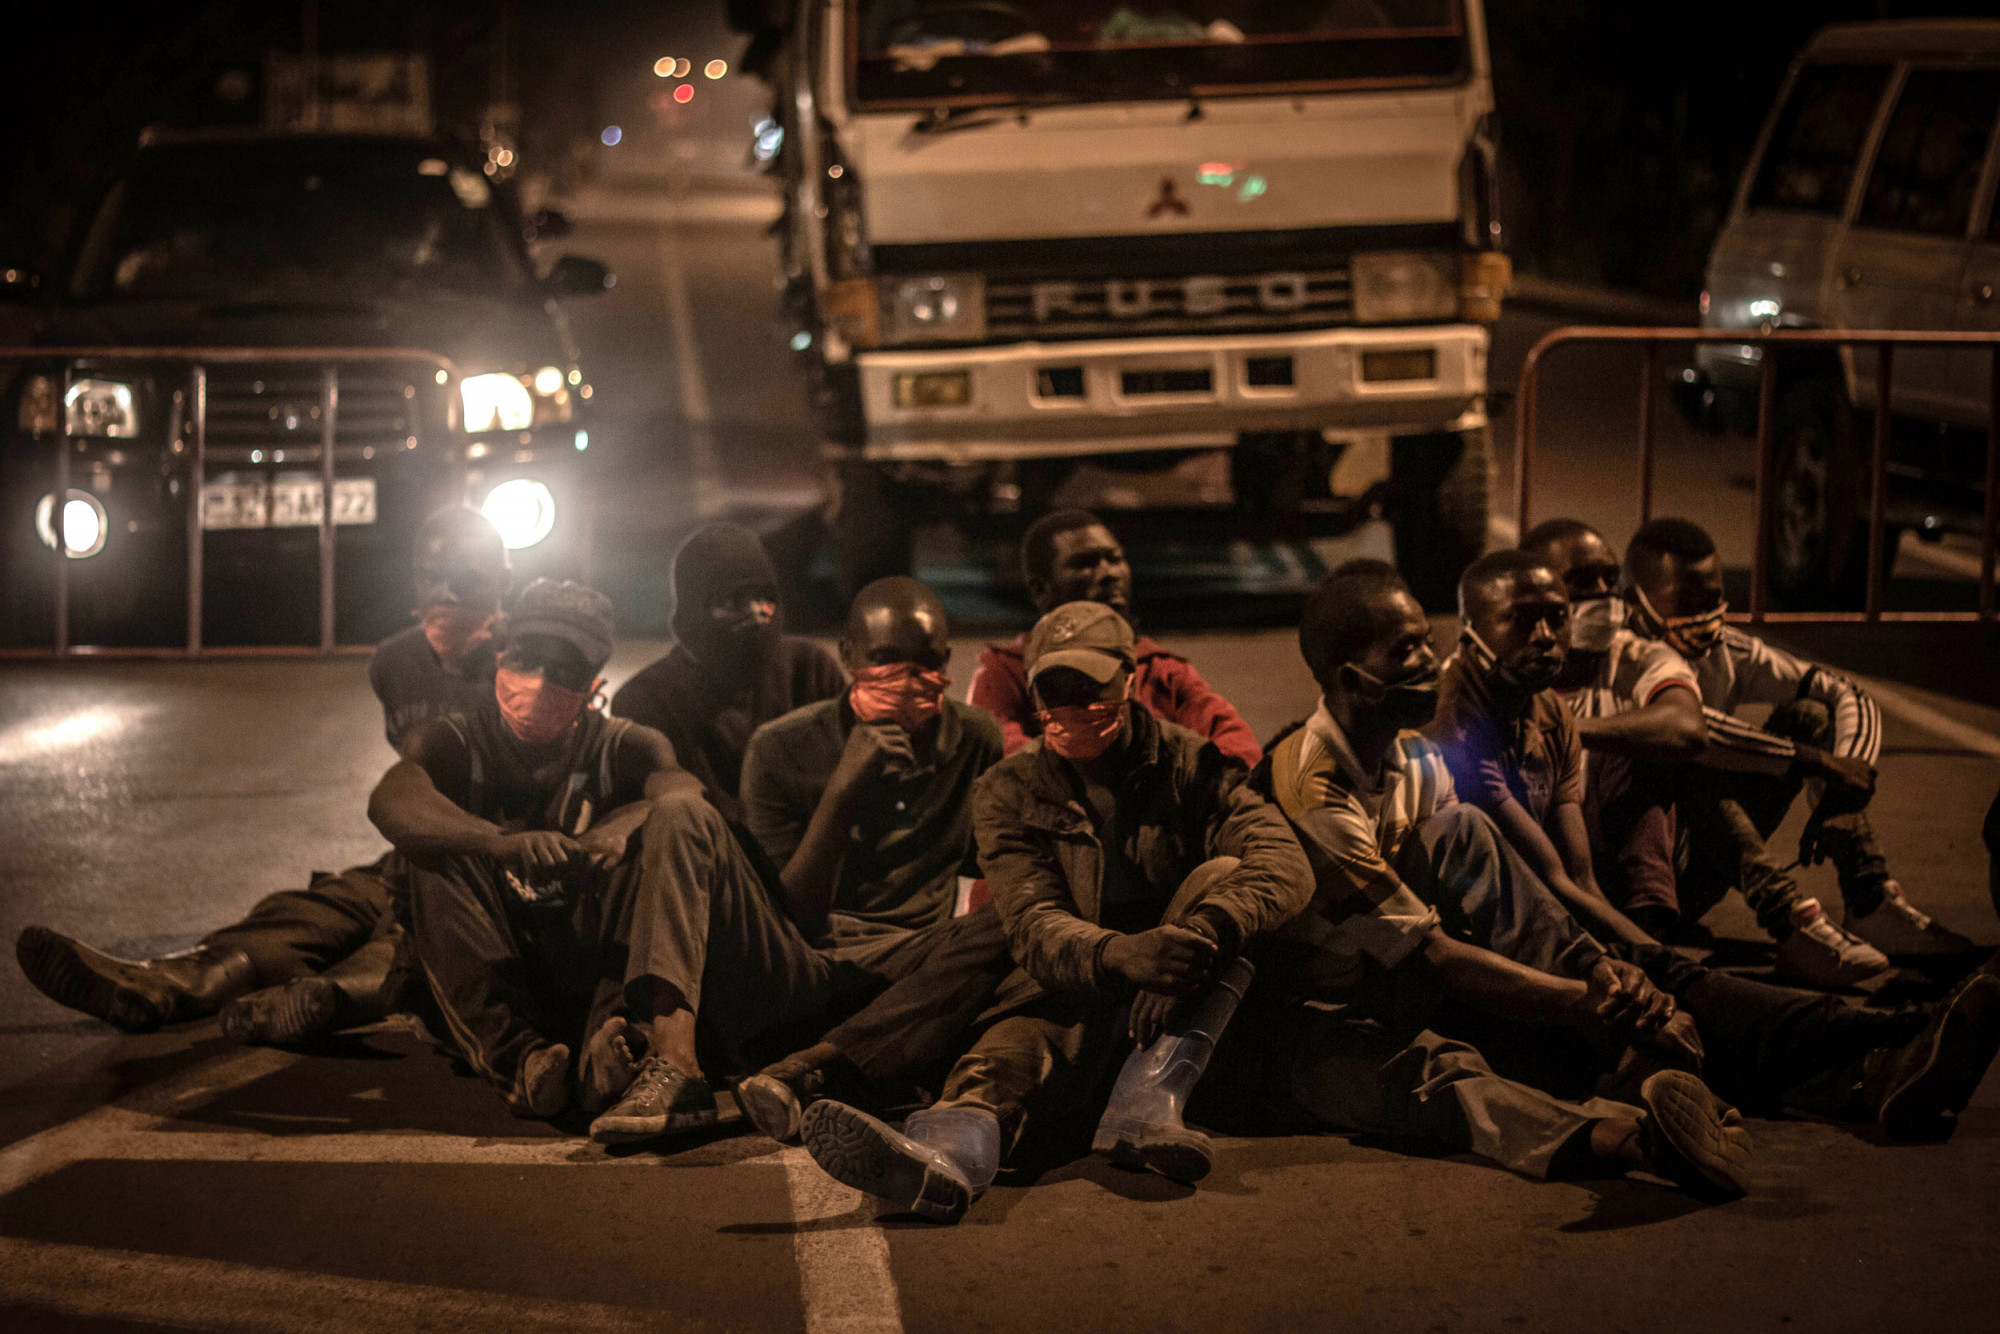 Goma, DRC, May 20th, 2020. Men sit on a road after being detained by police for breaking a new curfew imposed to limit the spread of coronavirus in the eastern Congolese city of Goma on Wednesday. © Guerchom Ndebo for Fondation Carmignac